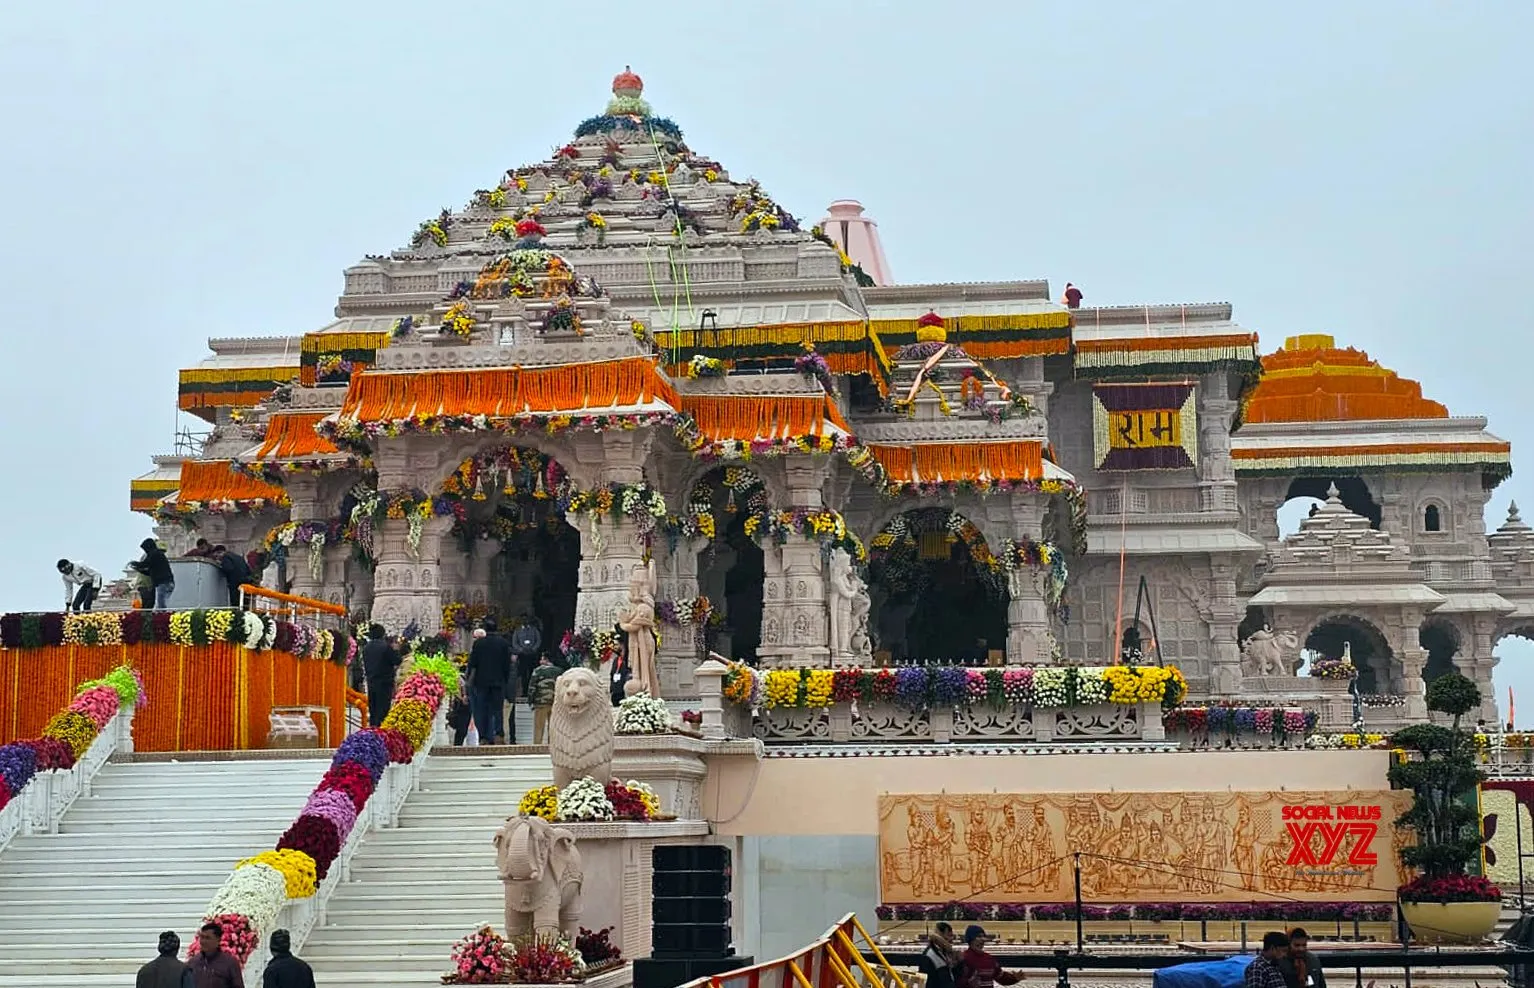 Ayodhya wakes up to a new dawn to welcome Lord Ram - Chandigarh City News